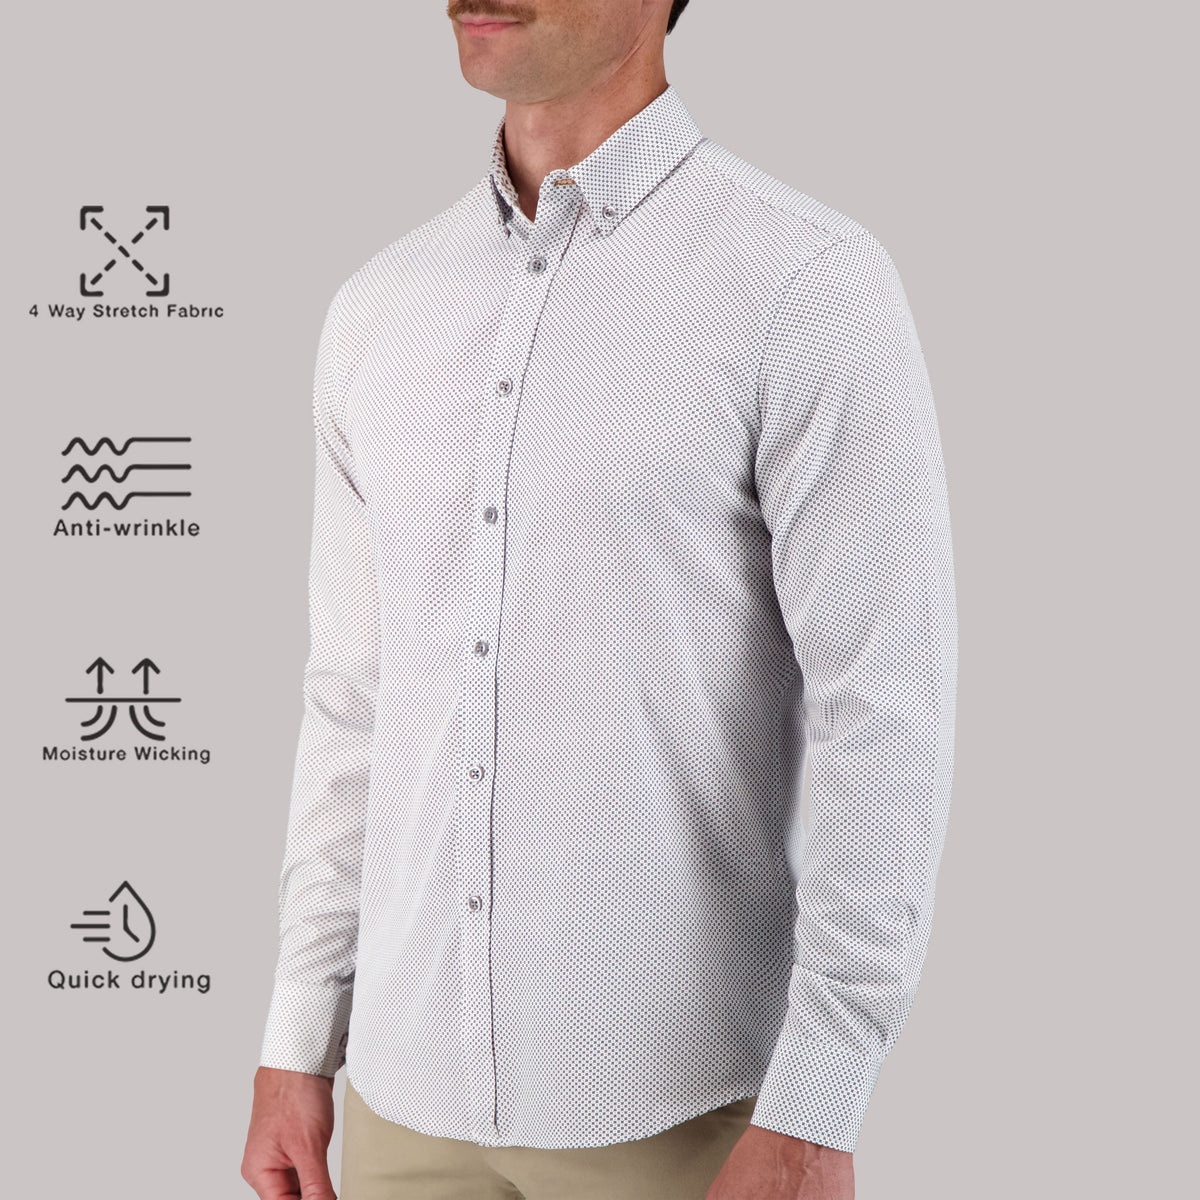 Model Side View of Long Sleeve 4-Way Sport Shirt with Geometric Print in White with description of material being 4 way stretch fabric, anti-wrinkle, moisture wicking and quick drying